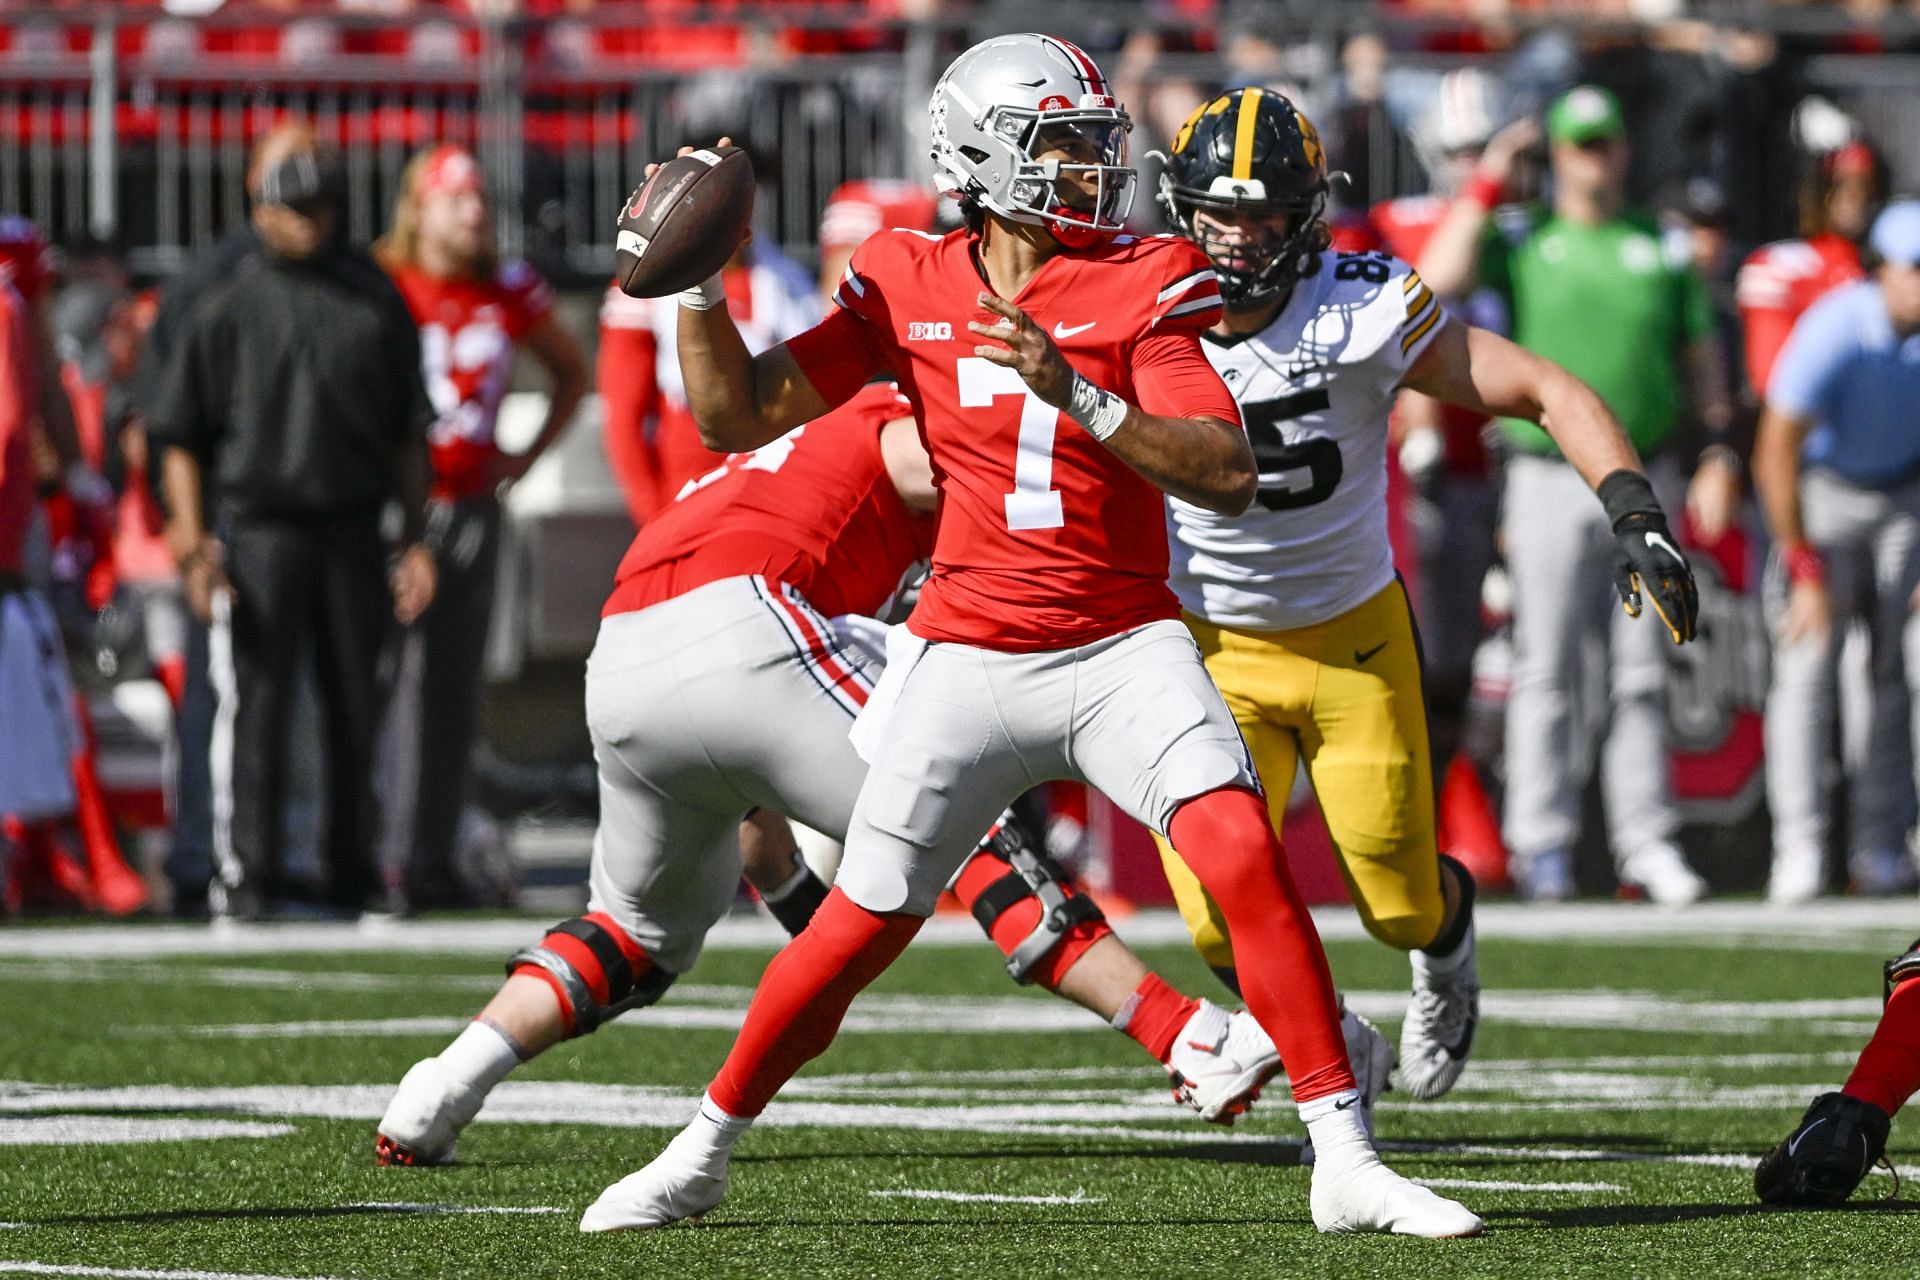 Ohio State&#039;s C.J. Stroud a frustrating 4-10-1 record, the Colts are clearly one of the worst teams in the league right now. They must address several areas, such as the offensive line, but their biggest need is a young, franchise quarterback who they can build around for many years to come.